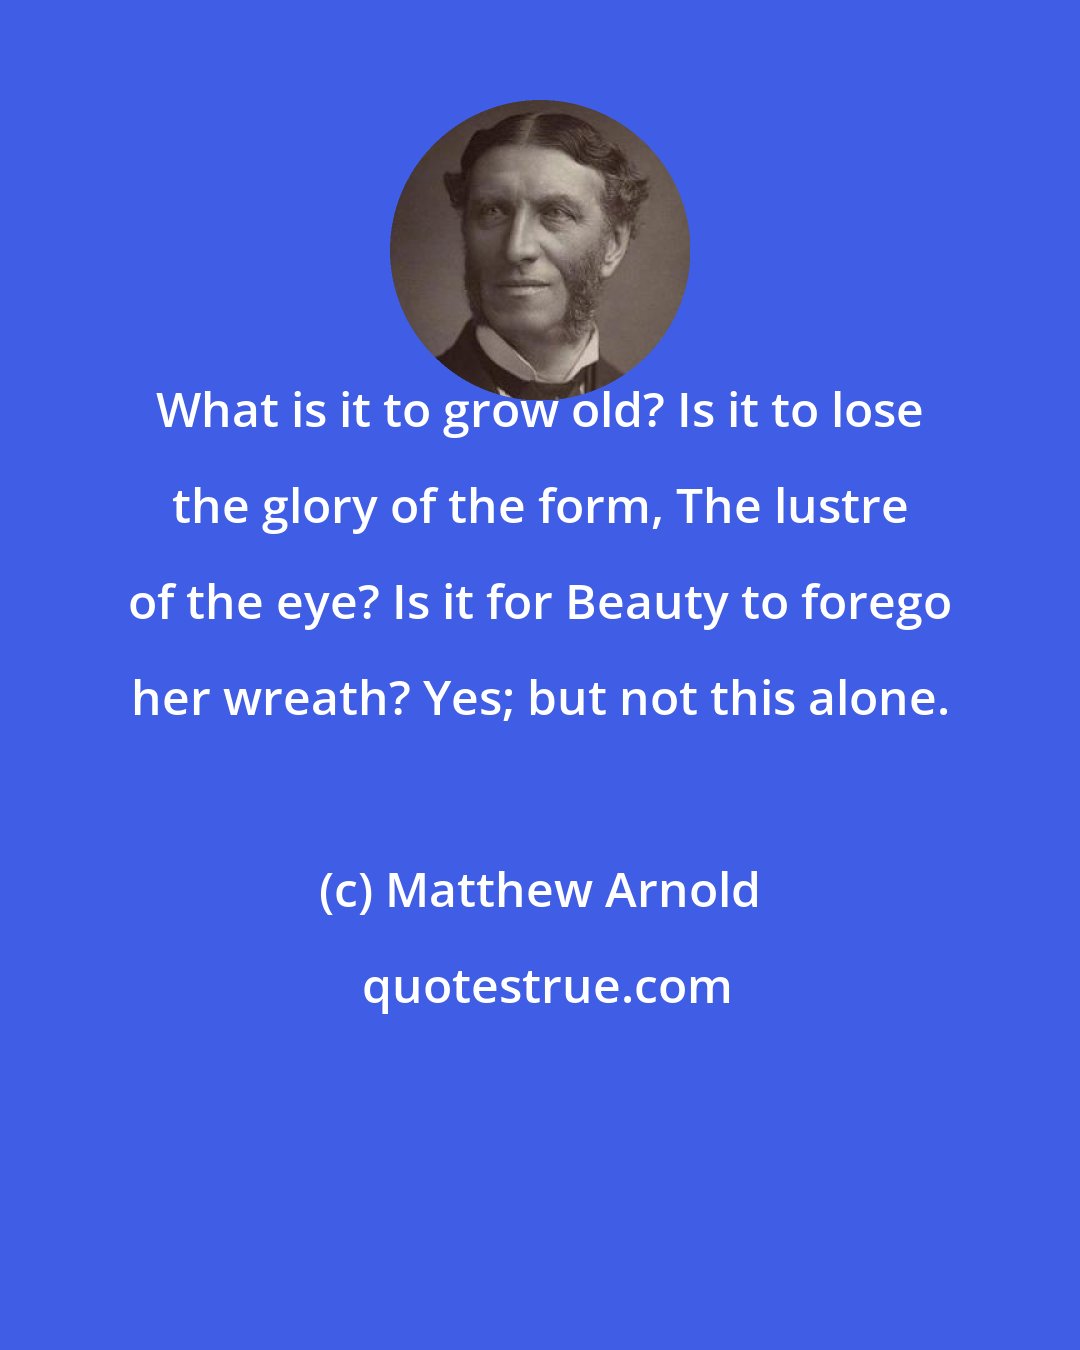 Matthew Arnold: What is it to grow old? Is it to lose the glory of the form, The lustre of the eye? Is it for Beauty to forego her wreath? Yes; but not this alone.